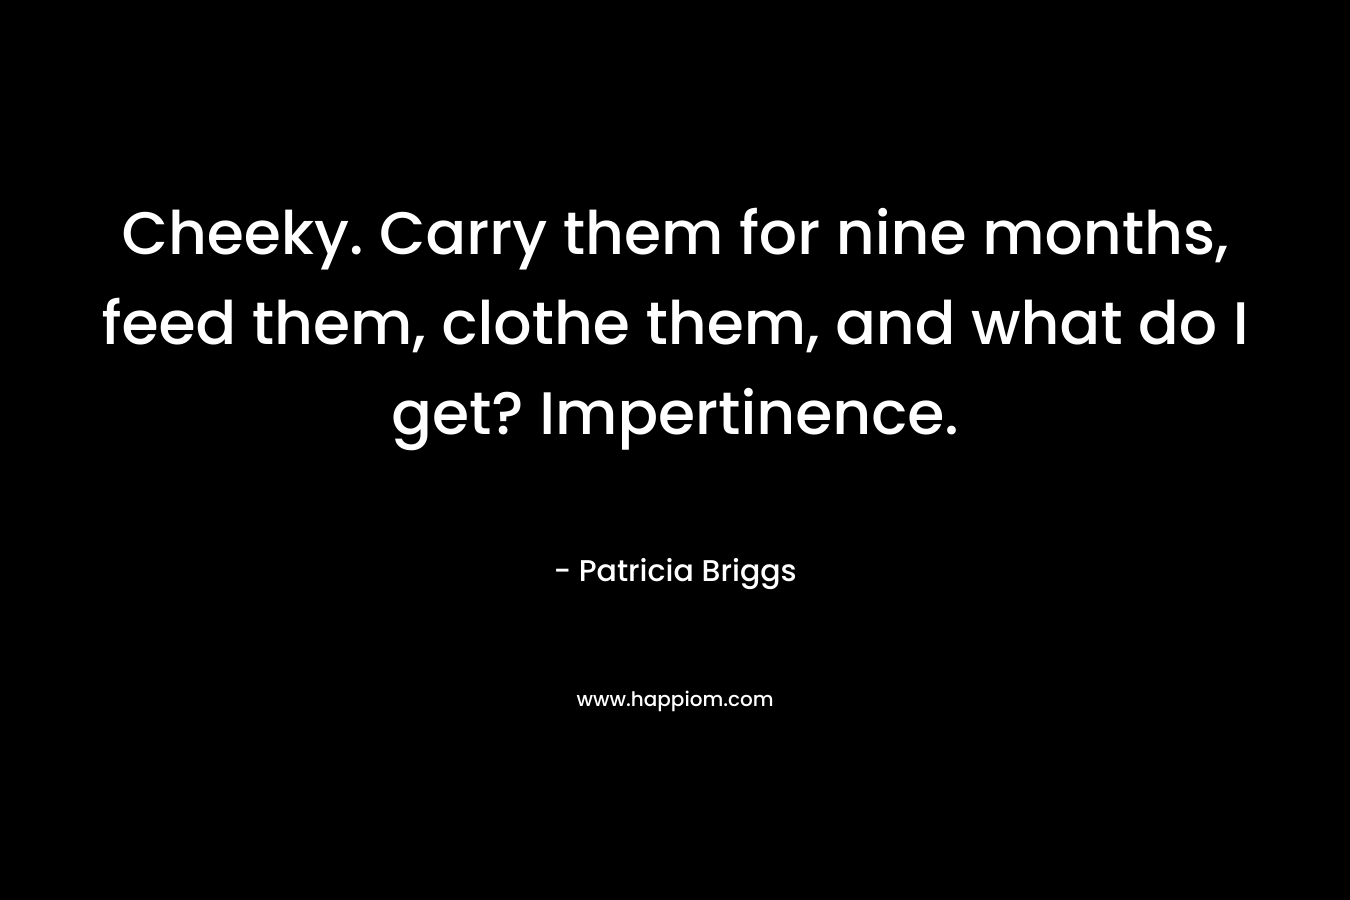 Cheeky. Carry them for nine months, feed them, clothe them, and what do I get? Impertinence. – Patricia Briggs